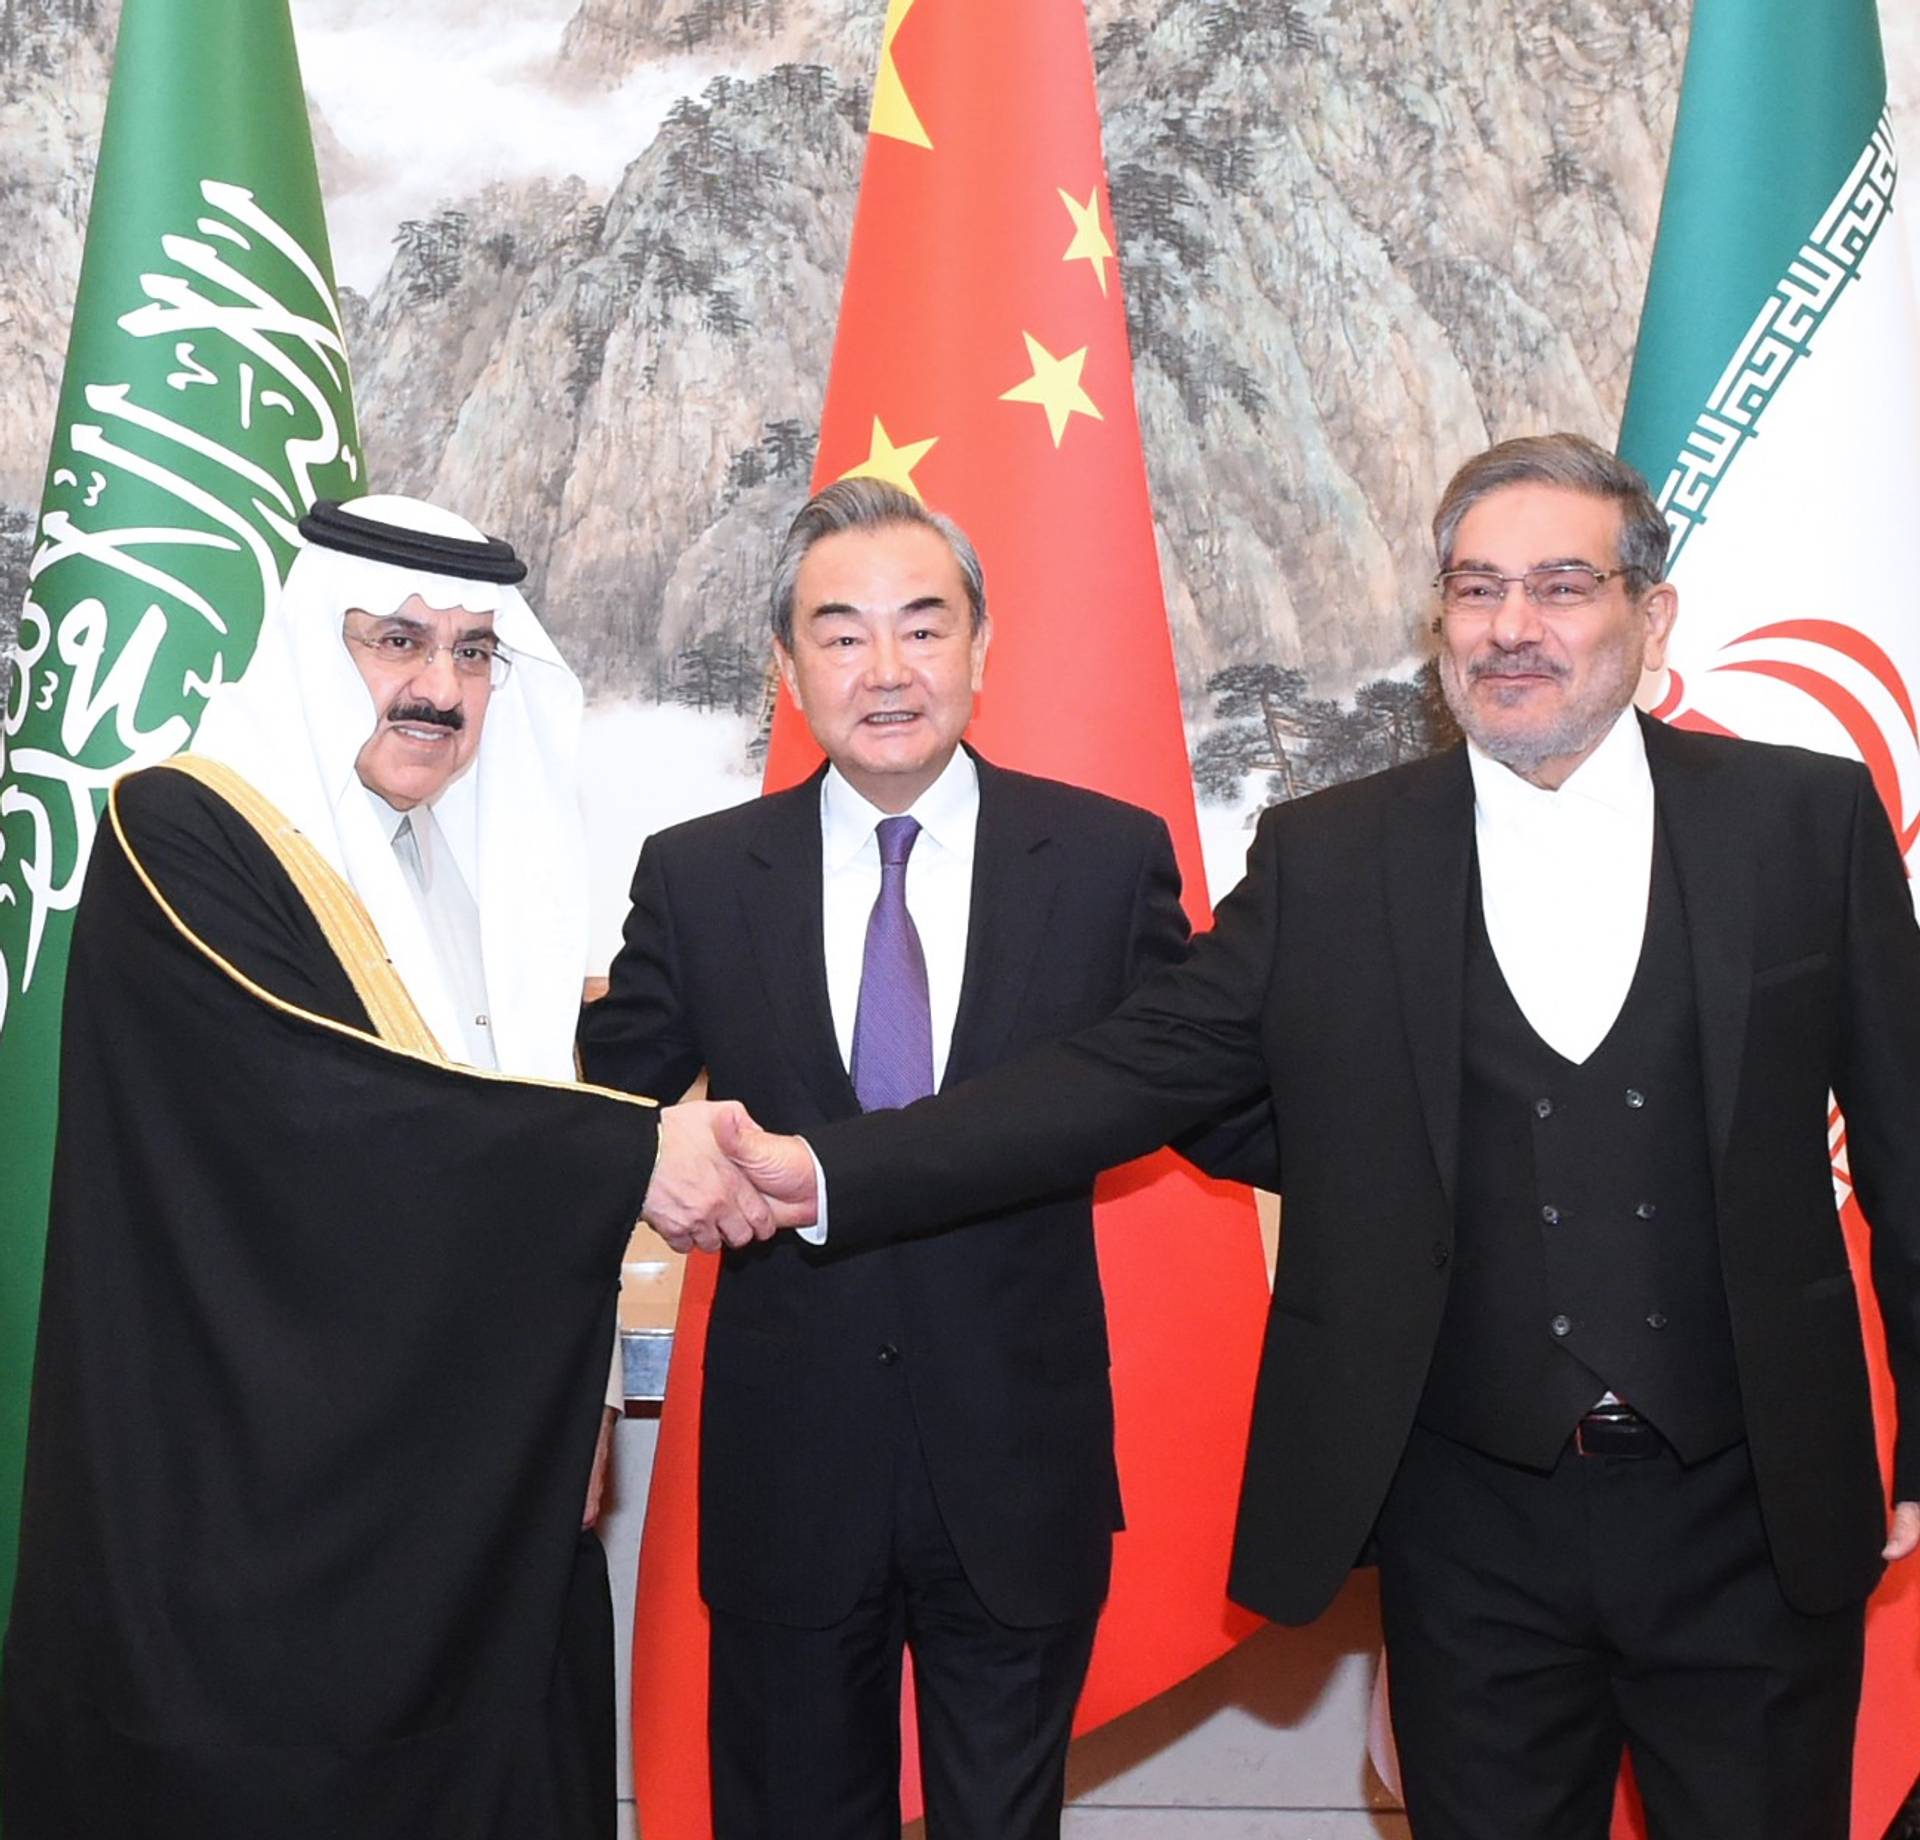 From left: Saudi Minister of State Musaad bin Mohammed Al-Aiban, CCP Politburo member Wang Yi, and Iranian Secretary of the Supreme National Security Council Ali Shamkhani in Beijing, March 10, 2023